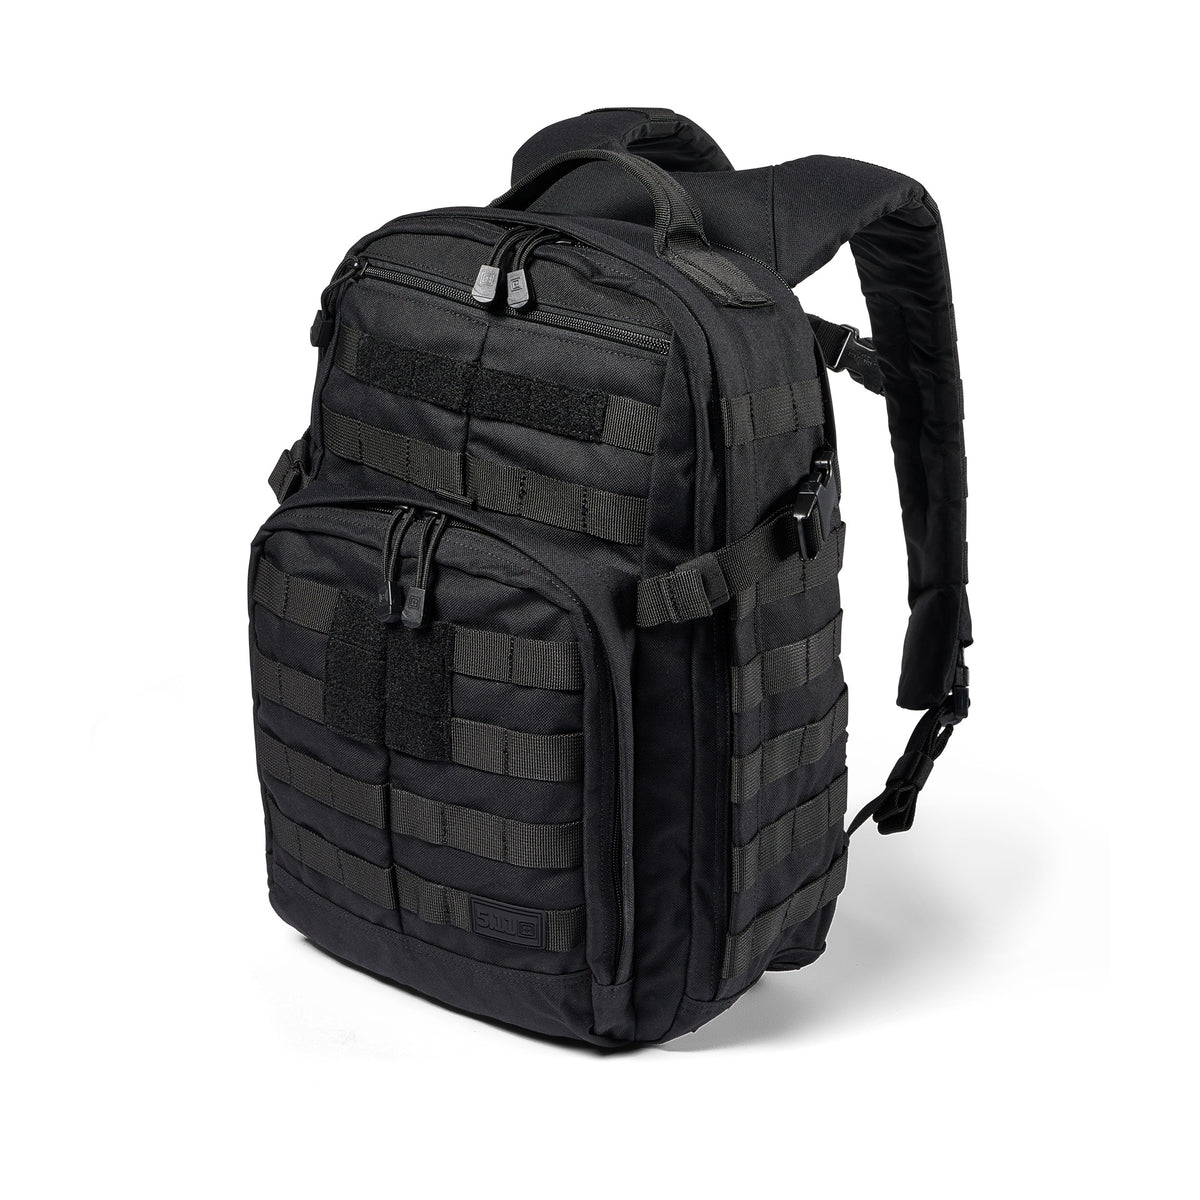 RUSH12 2.0 BACKPACK 24L　TACTICAL 5.11